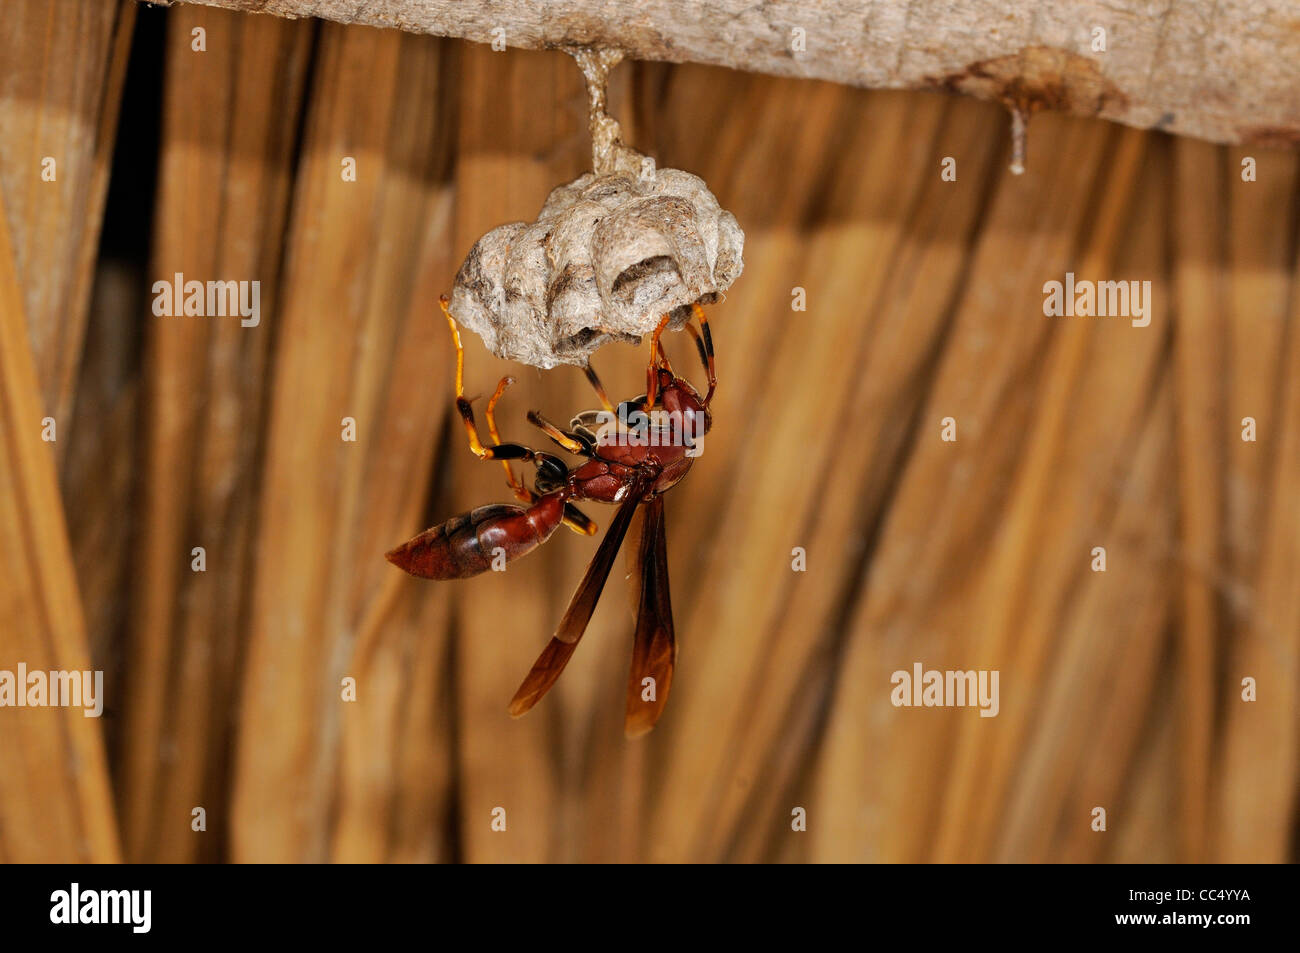 Marabunta or Spider Wasp (Family Pompilidae) solitary wasp at nest in thatched roof, Rupununi, Guyana Stock Photo